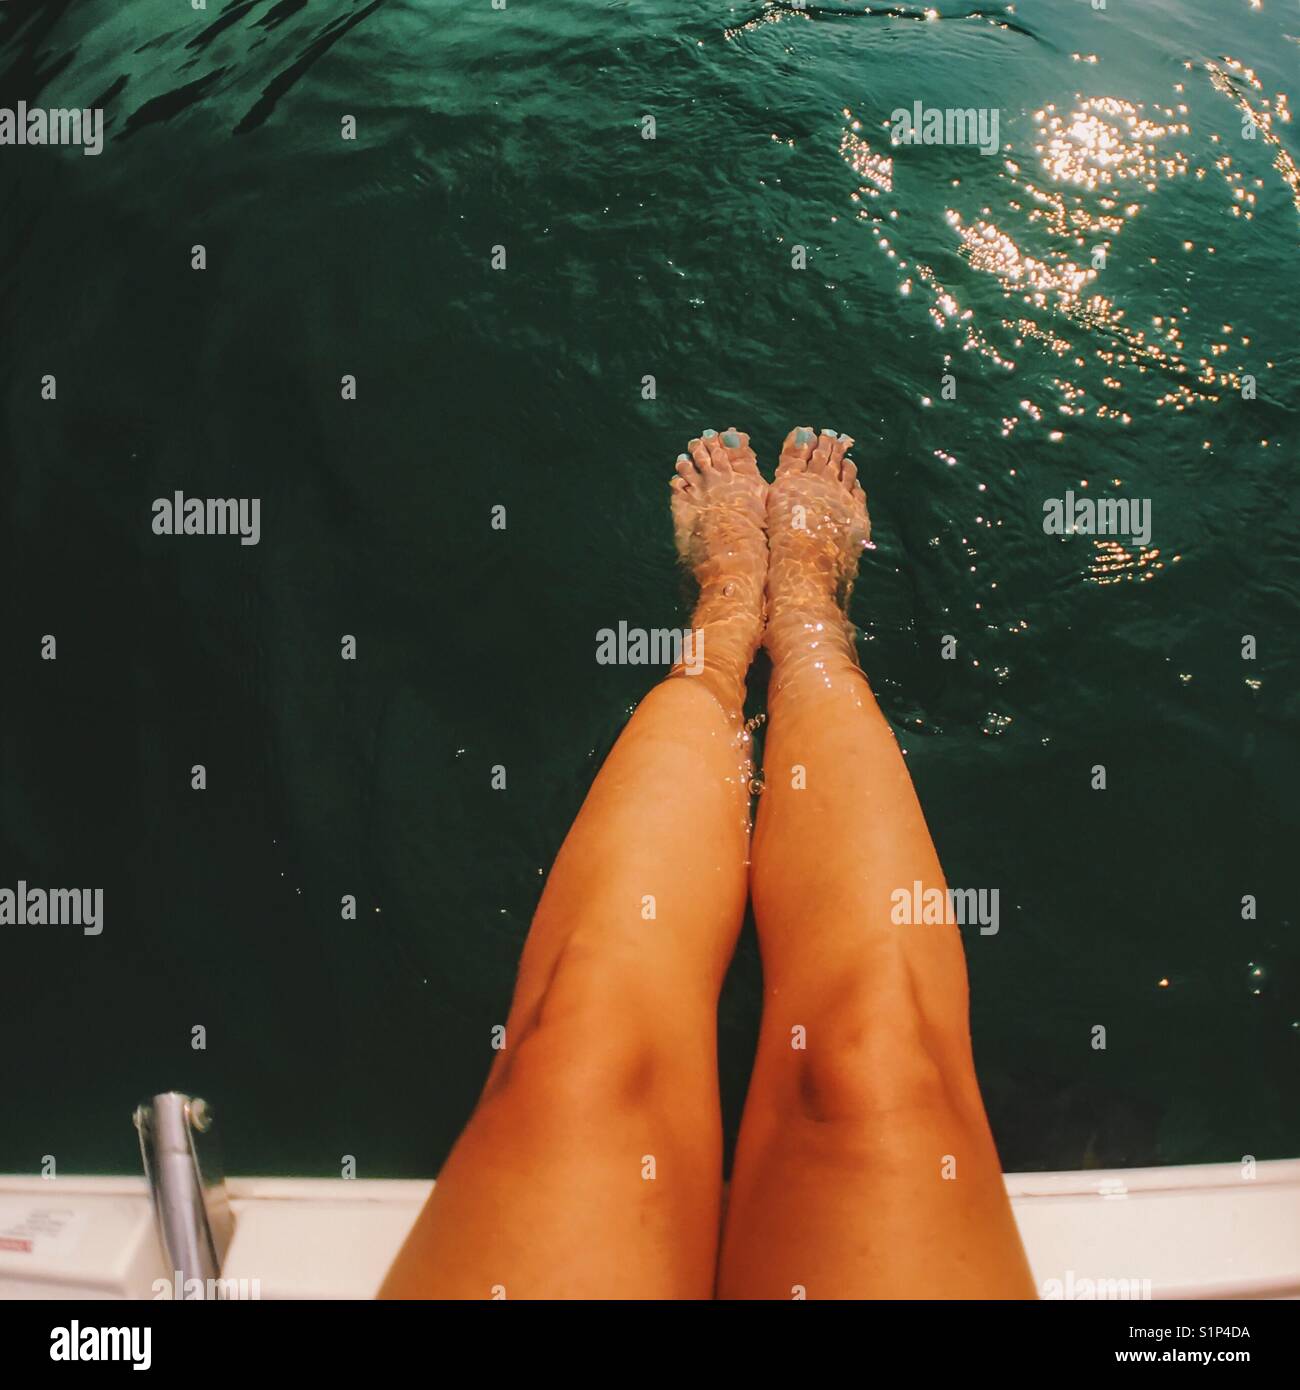 Legs of a woman sitting at the edge of a white boat, feet in the dark green water. Square crop. Stock Photo